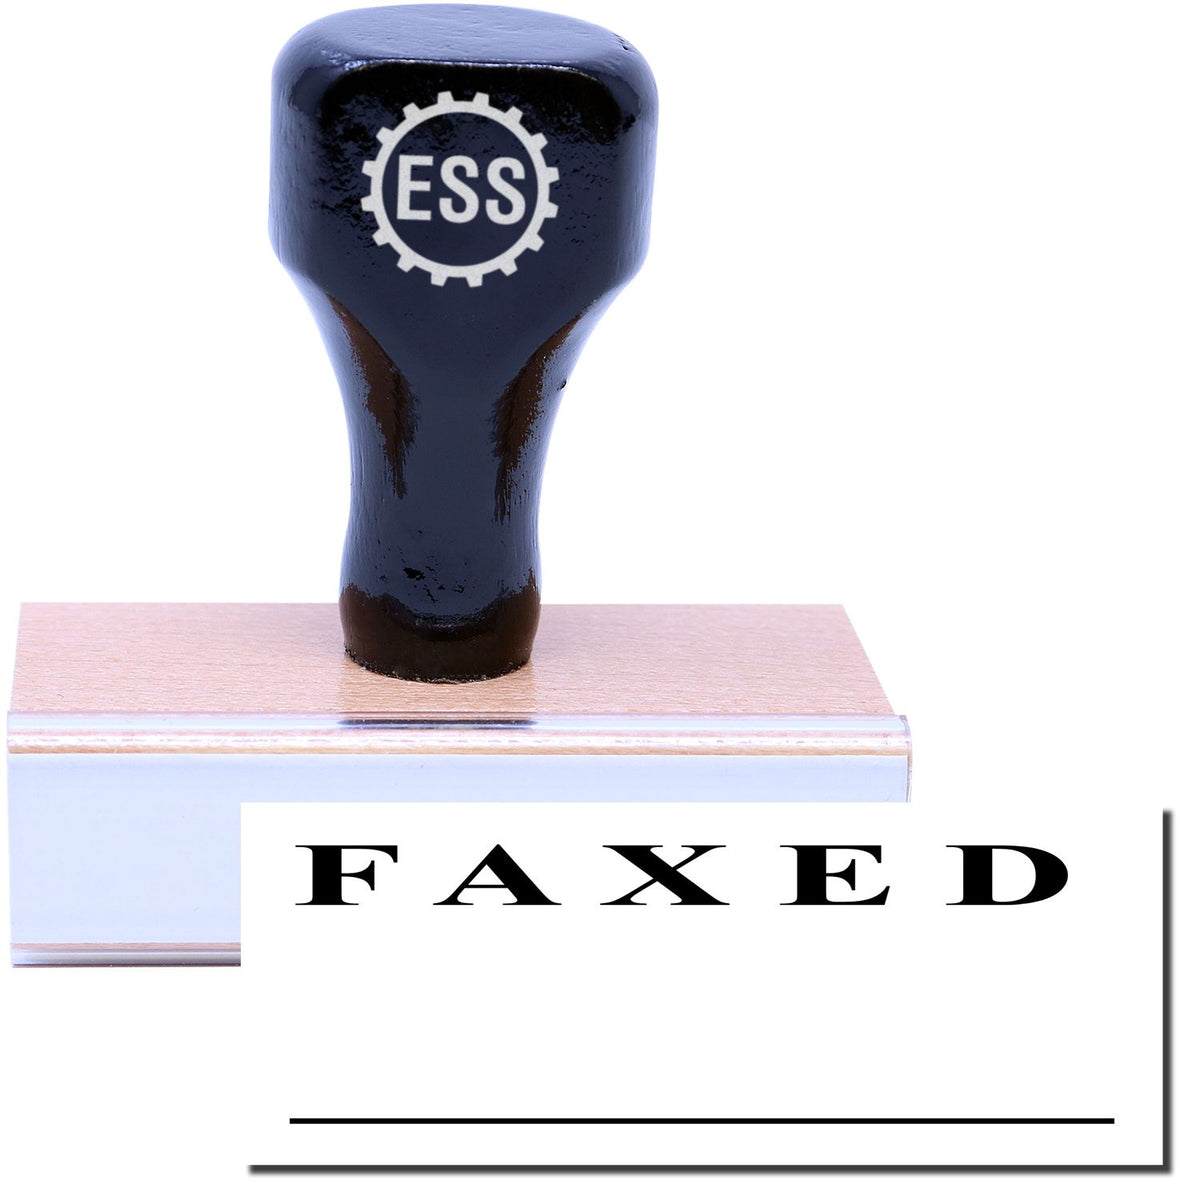 A stock office rubber stamp with a stamped image showing how the text &quot;FAXED&quot; with a line below the text is displayed after stamping.